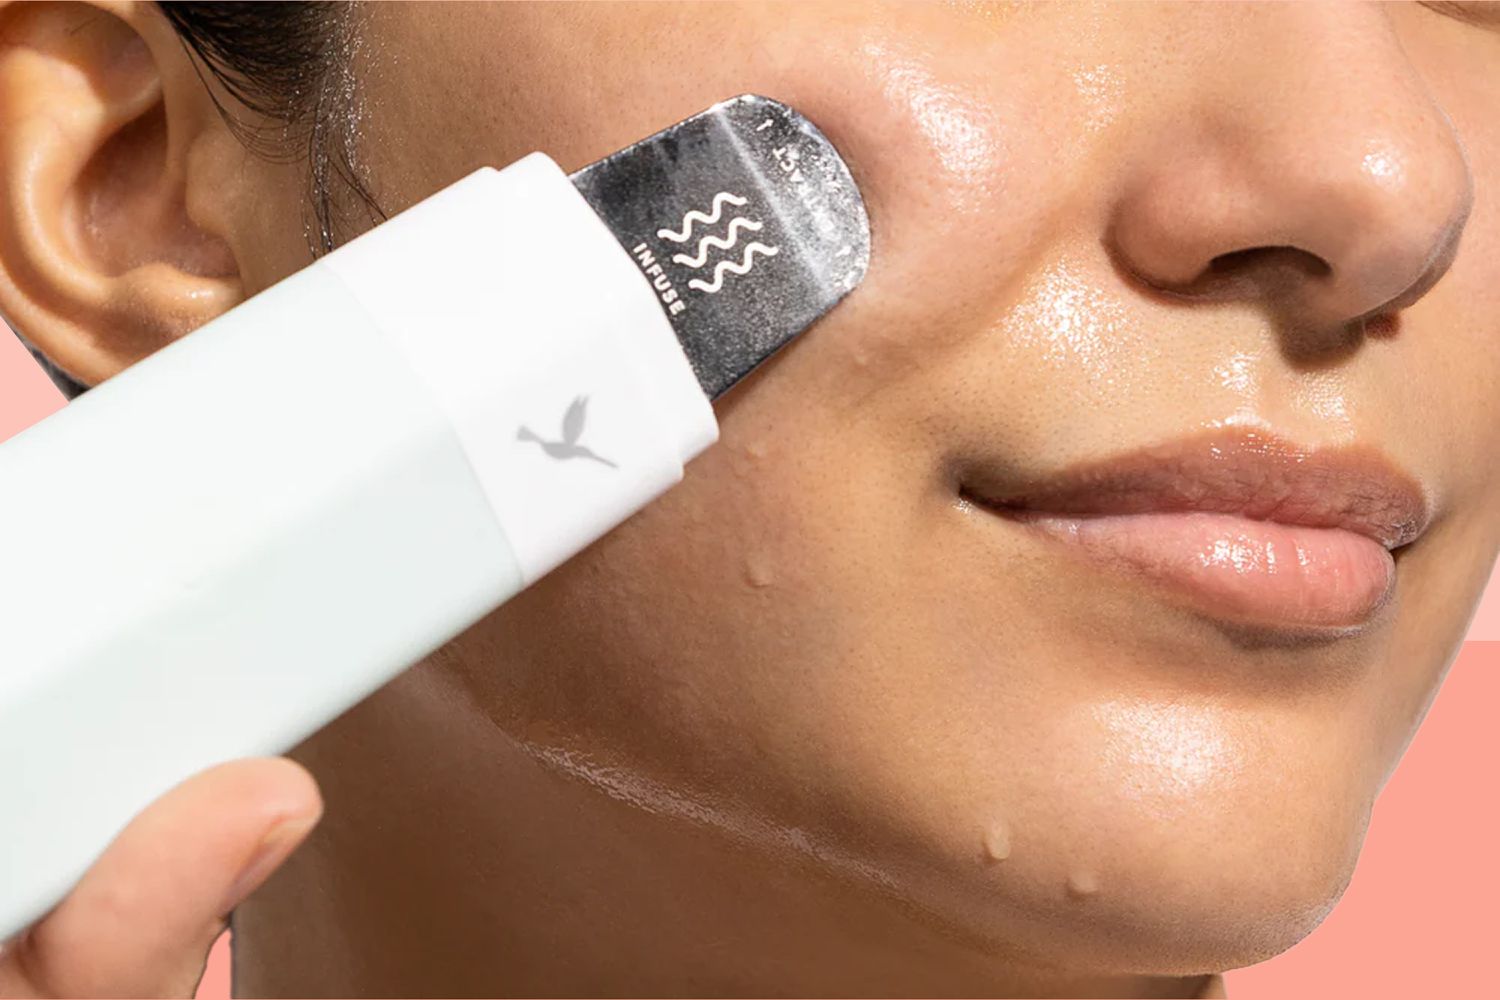 Grab This Internet-Favorite $99 Pore Extracting Tool for Just $40 With Our Exclusive Discount Code